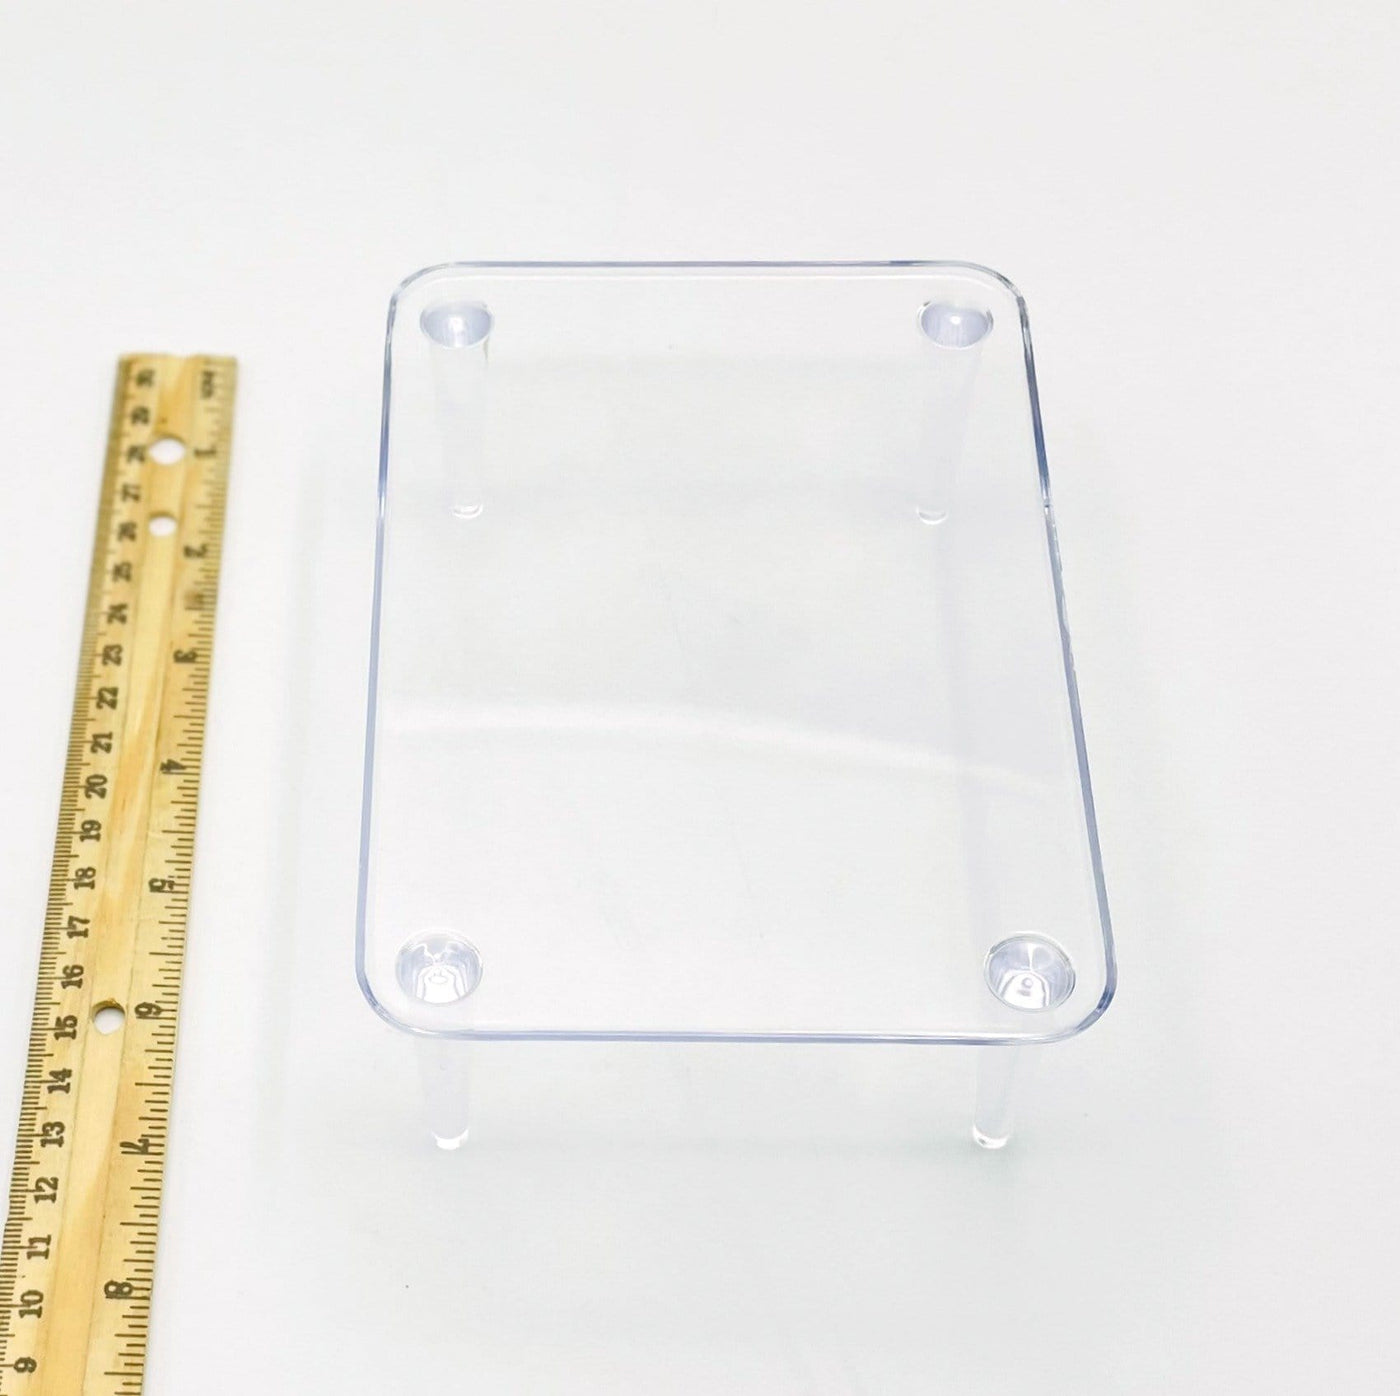 crystal display stand next to a ruler for size reference 